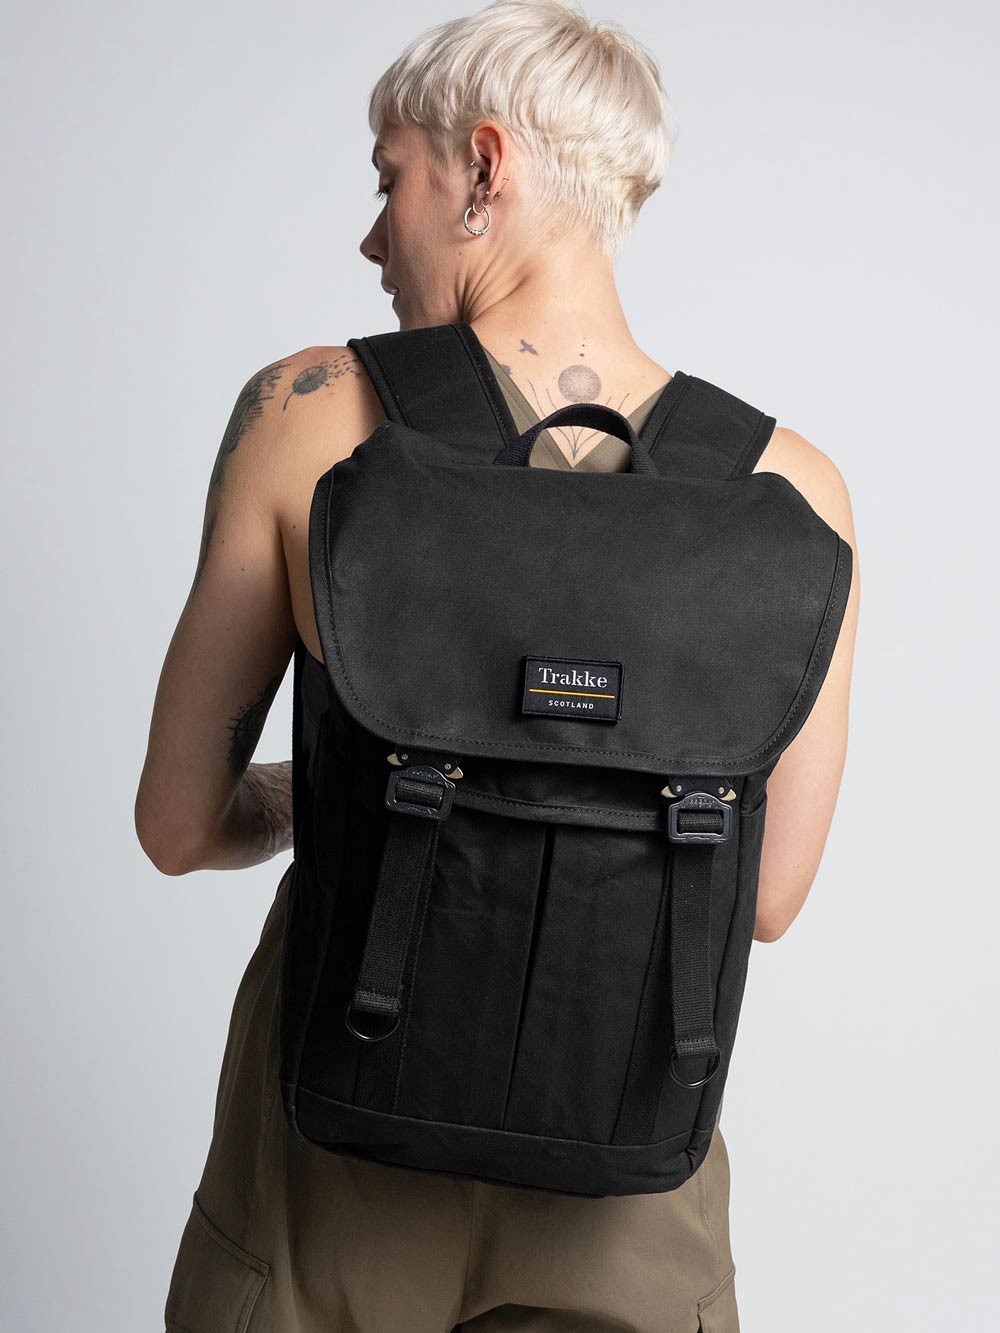 A female model is wearing the Trakke Bannoch Backpack in Black. The Bannoch is the COBRA variant